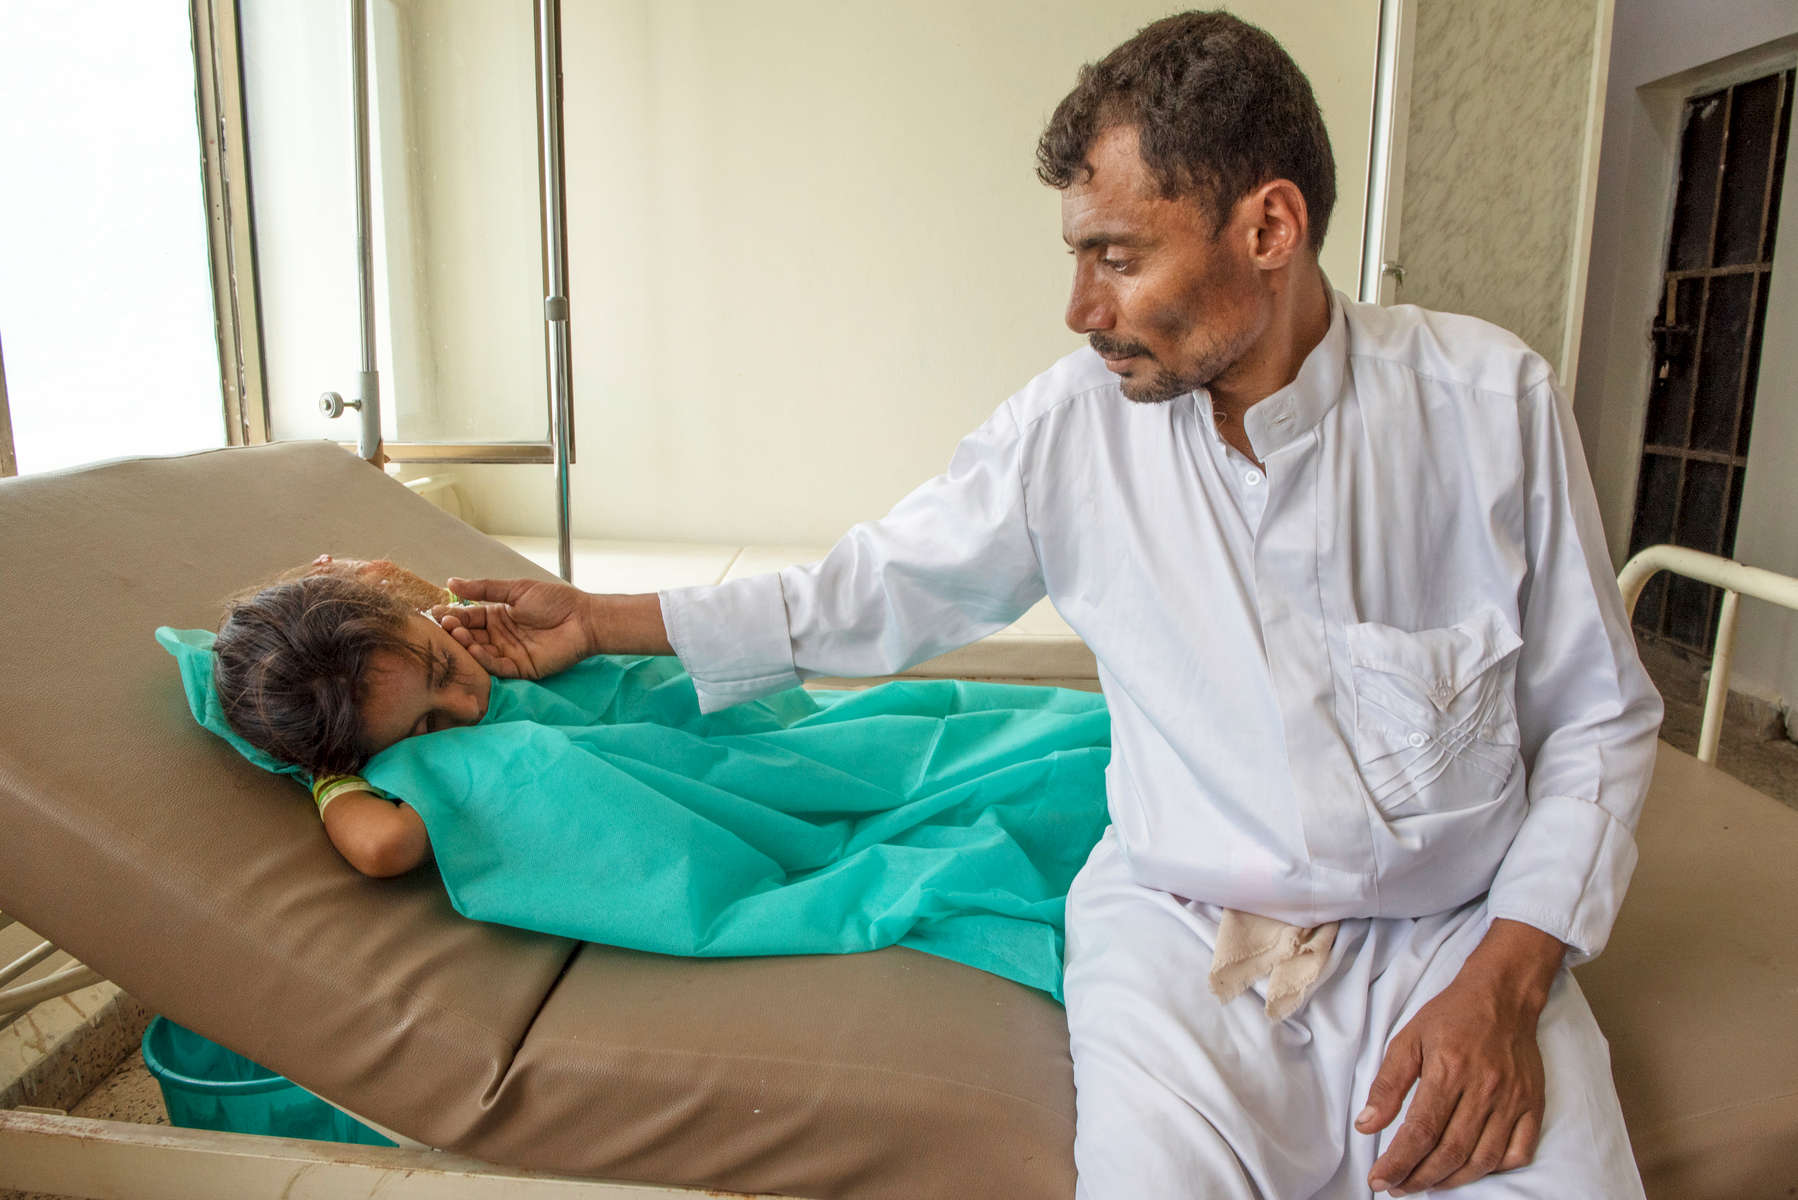 Abdullah and his 7-year-old daughter Nehan in a cholera isolation unit, where Nehan has just begun receiving treatment. Mercy Corps is providing cholera clinics with beds, IV fluids and water to help them meet the increasing needs of patients like her.